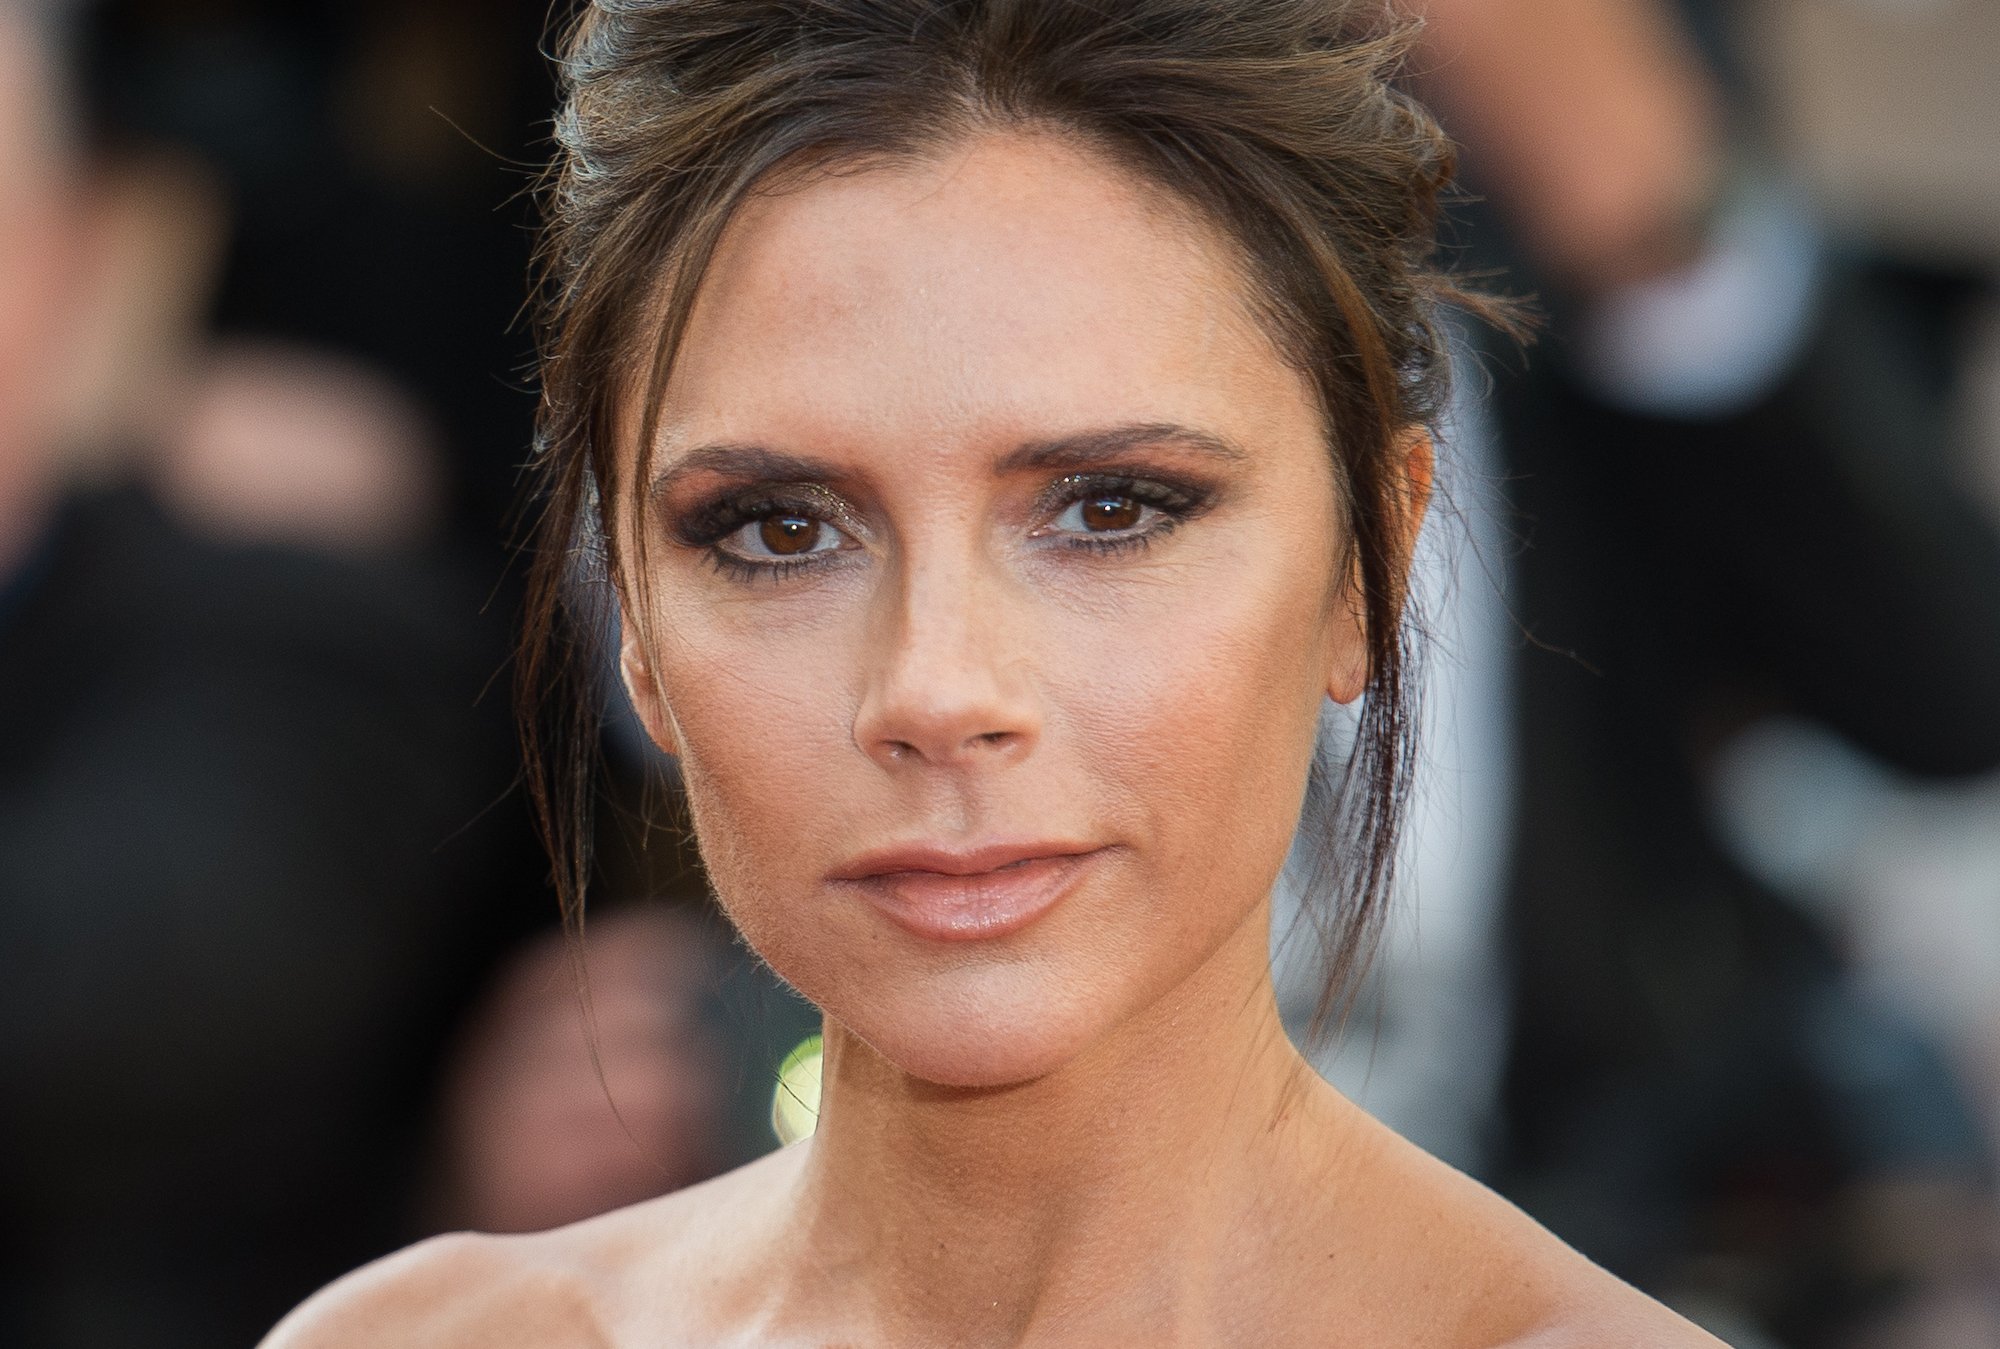 Victoria Beckham smiling in front of a blurred crowd